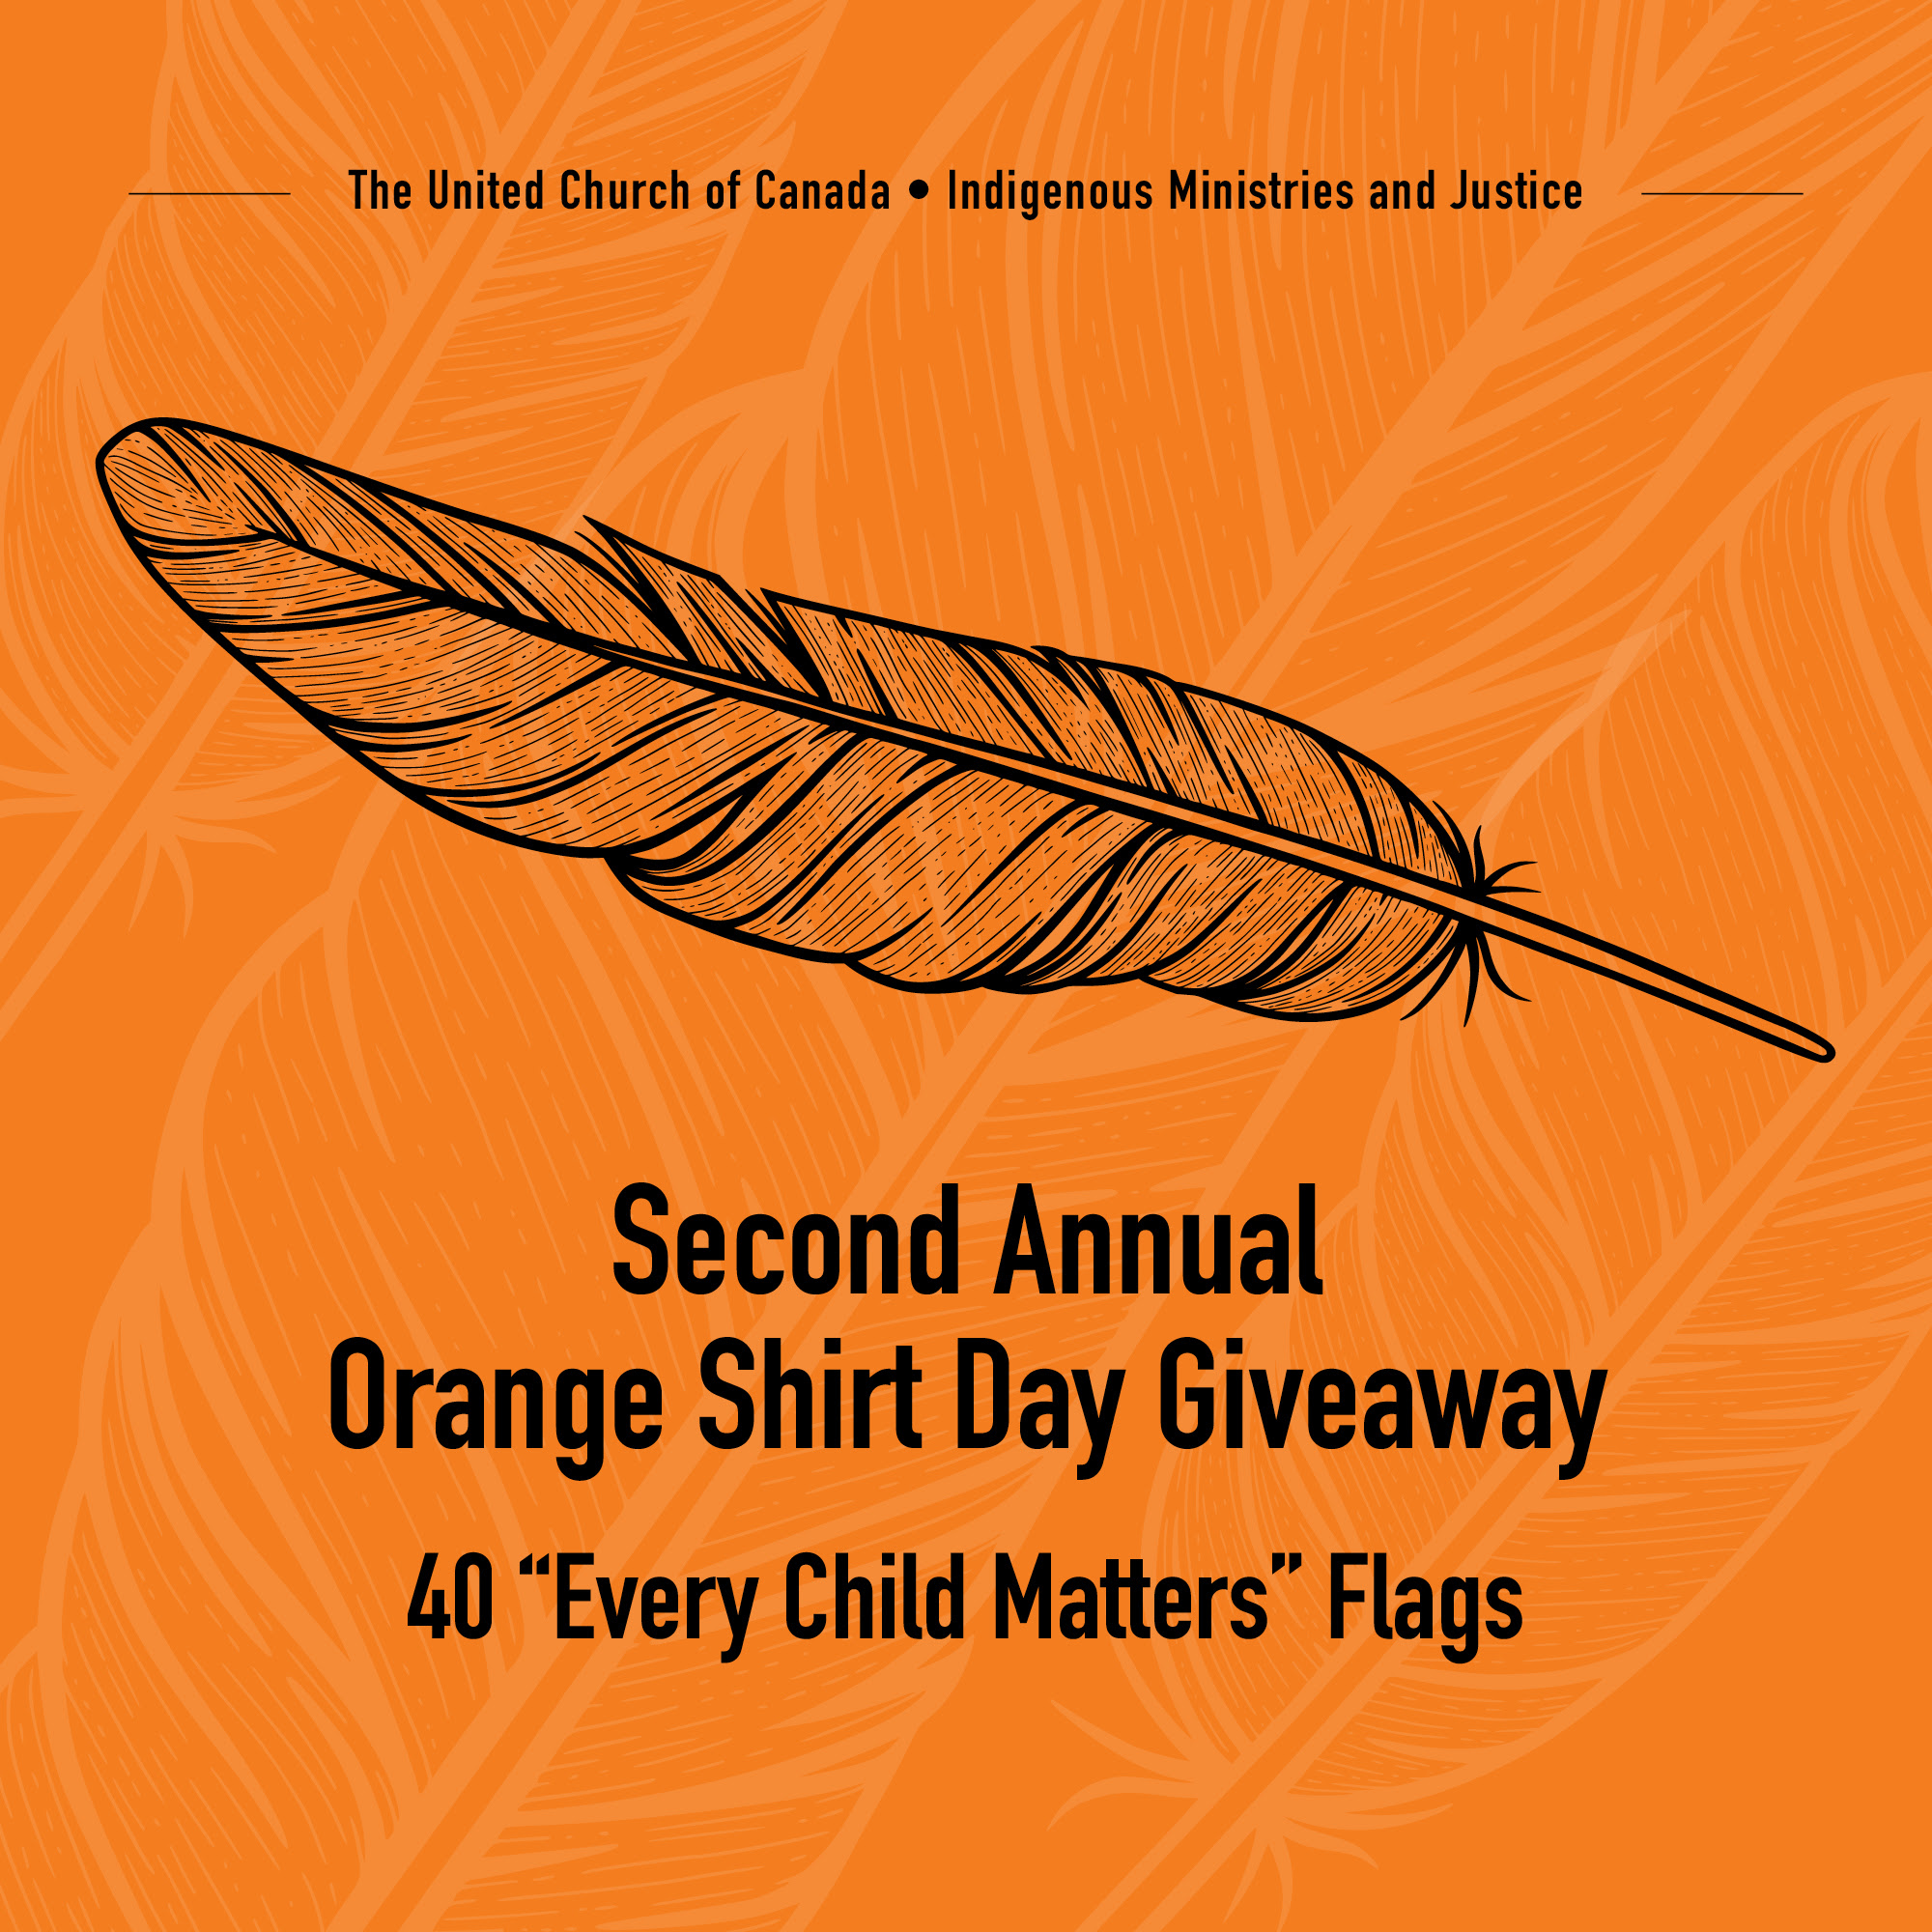 Second Annual Orange Shirt Day Giveaway